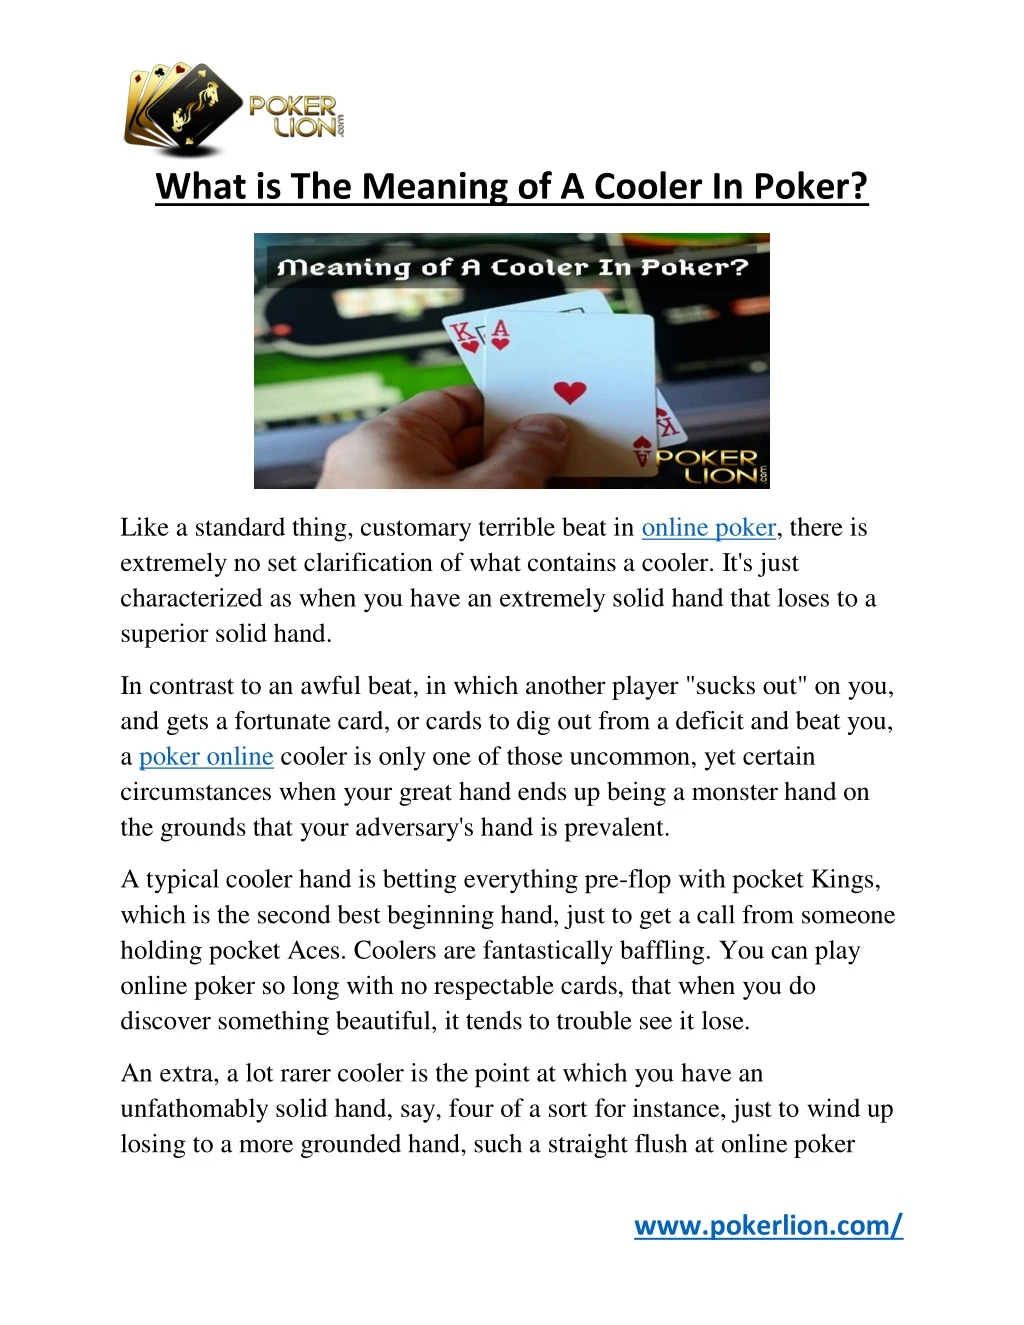 what is the meaning of a cooler in poker